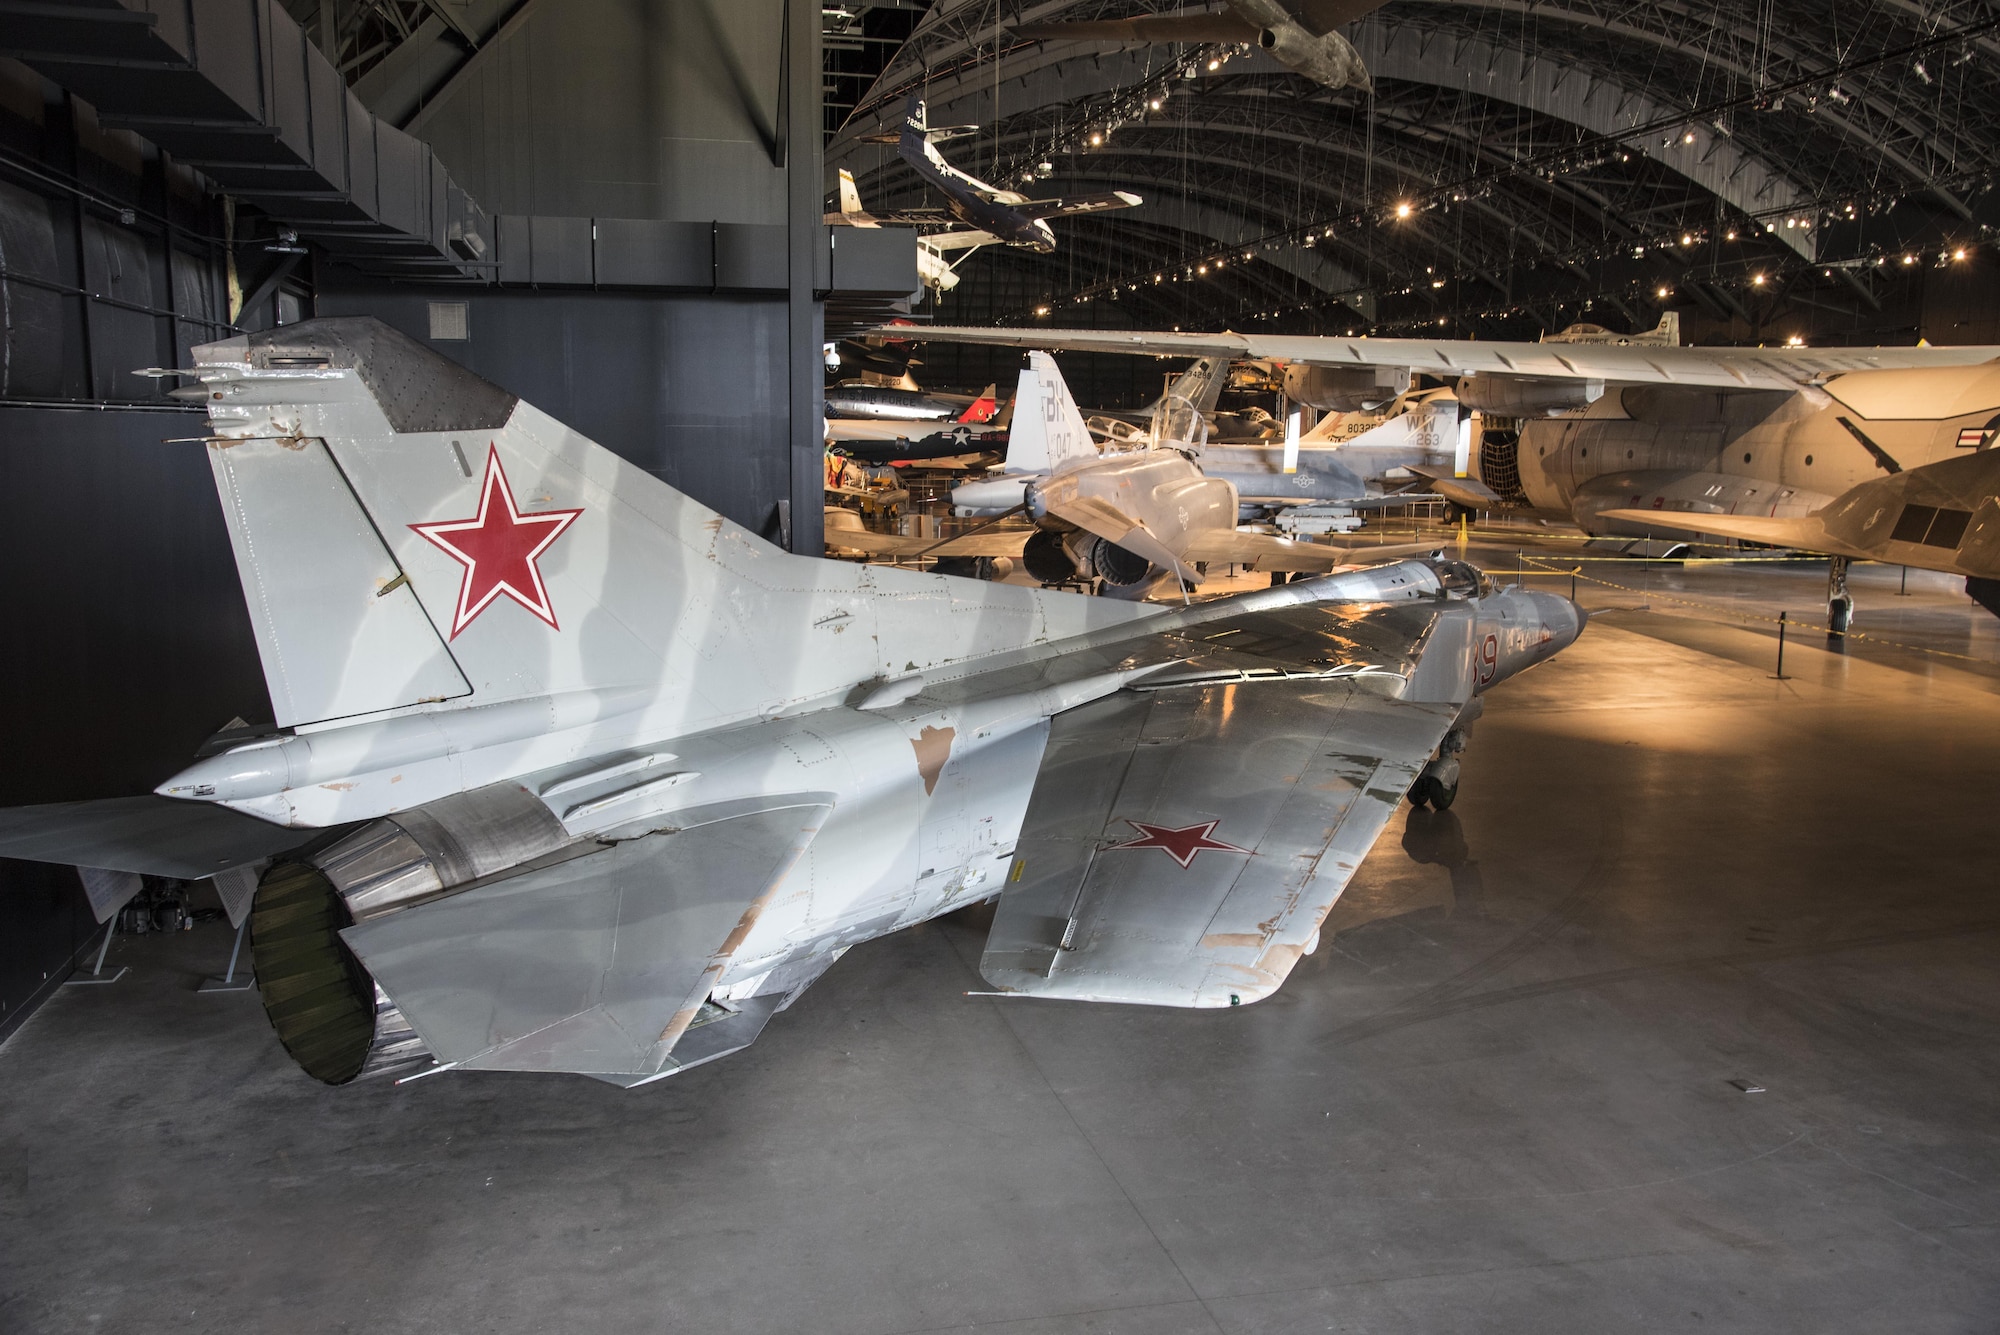 DAYTON, Ohio -- The Mikoyan-Gurevich MiG-23MS “Flogger-E” on display in the museum's Cold War Gallery. (U.S. Air Force photo by Ken LaRock)